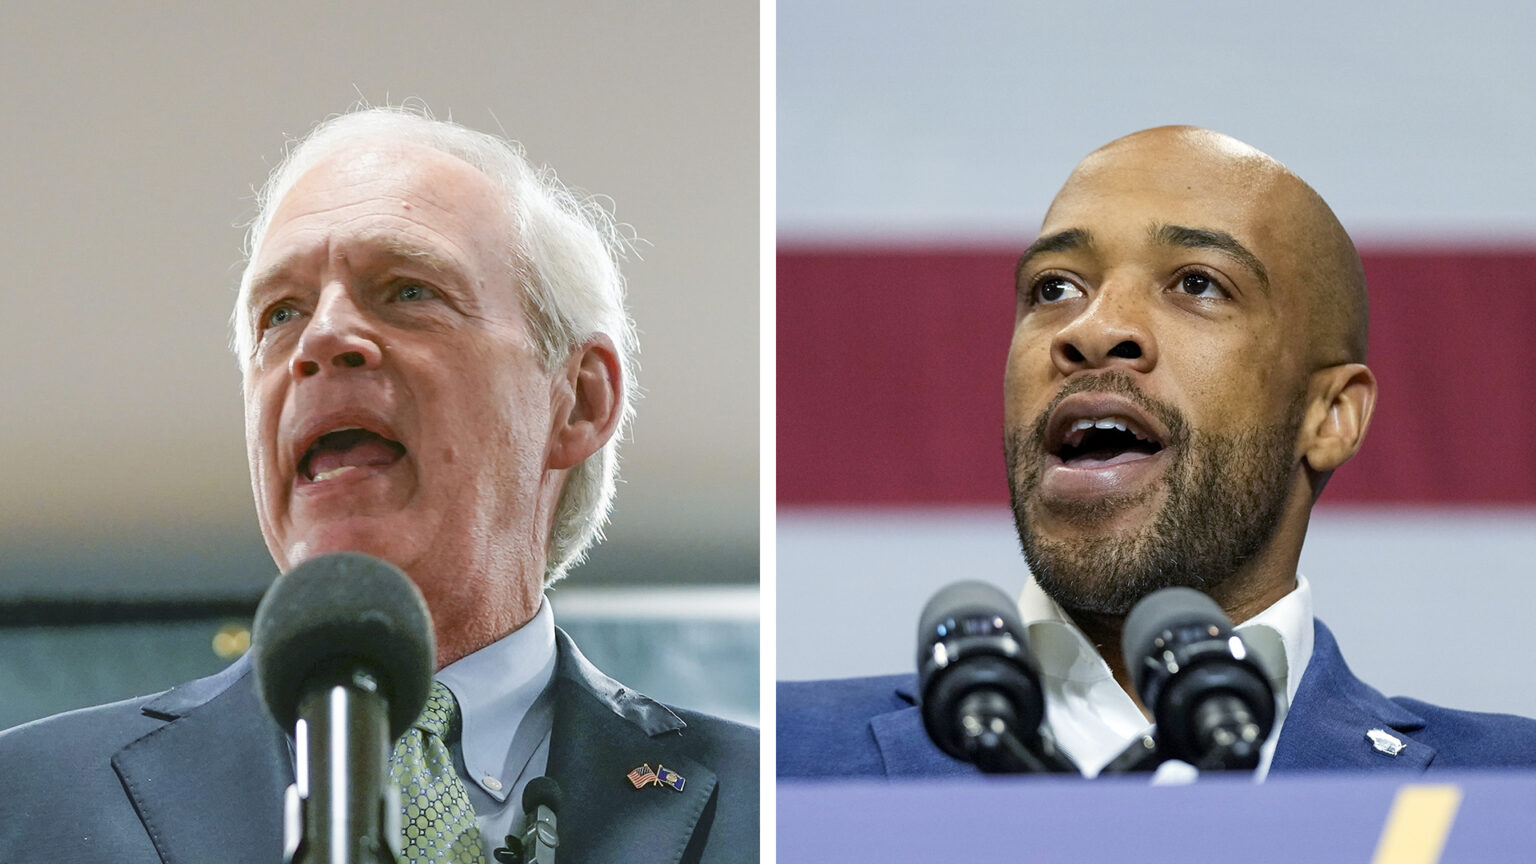 Side-by-side close-up photos show Ron Johnson (left) and Mandela Barnes (right) speaking into microphones.